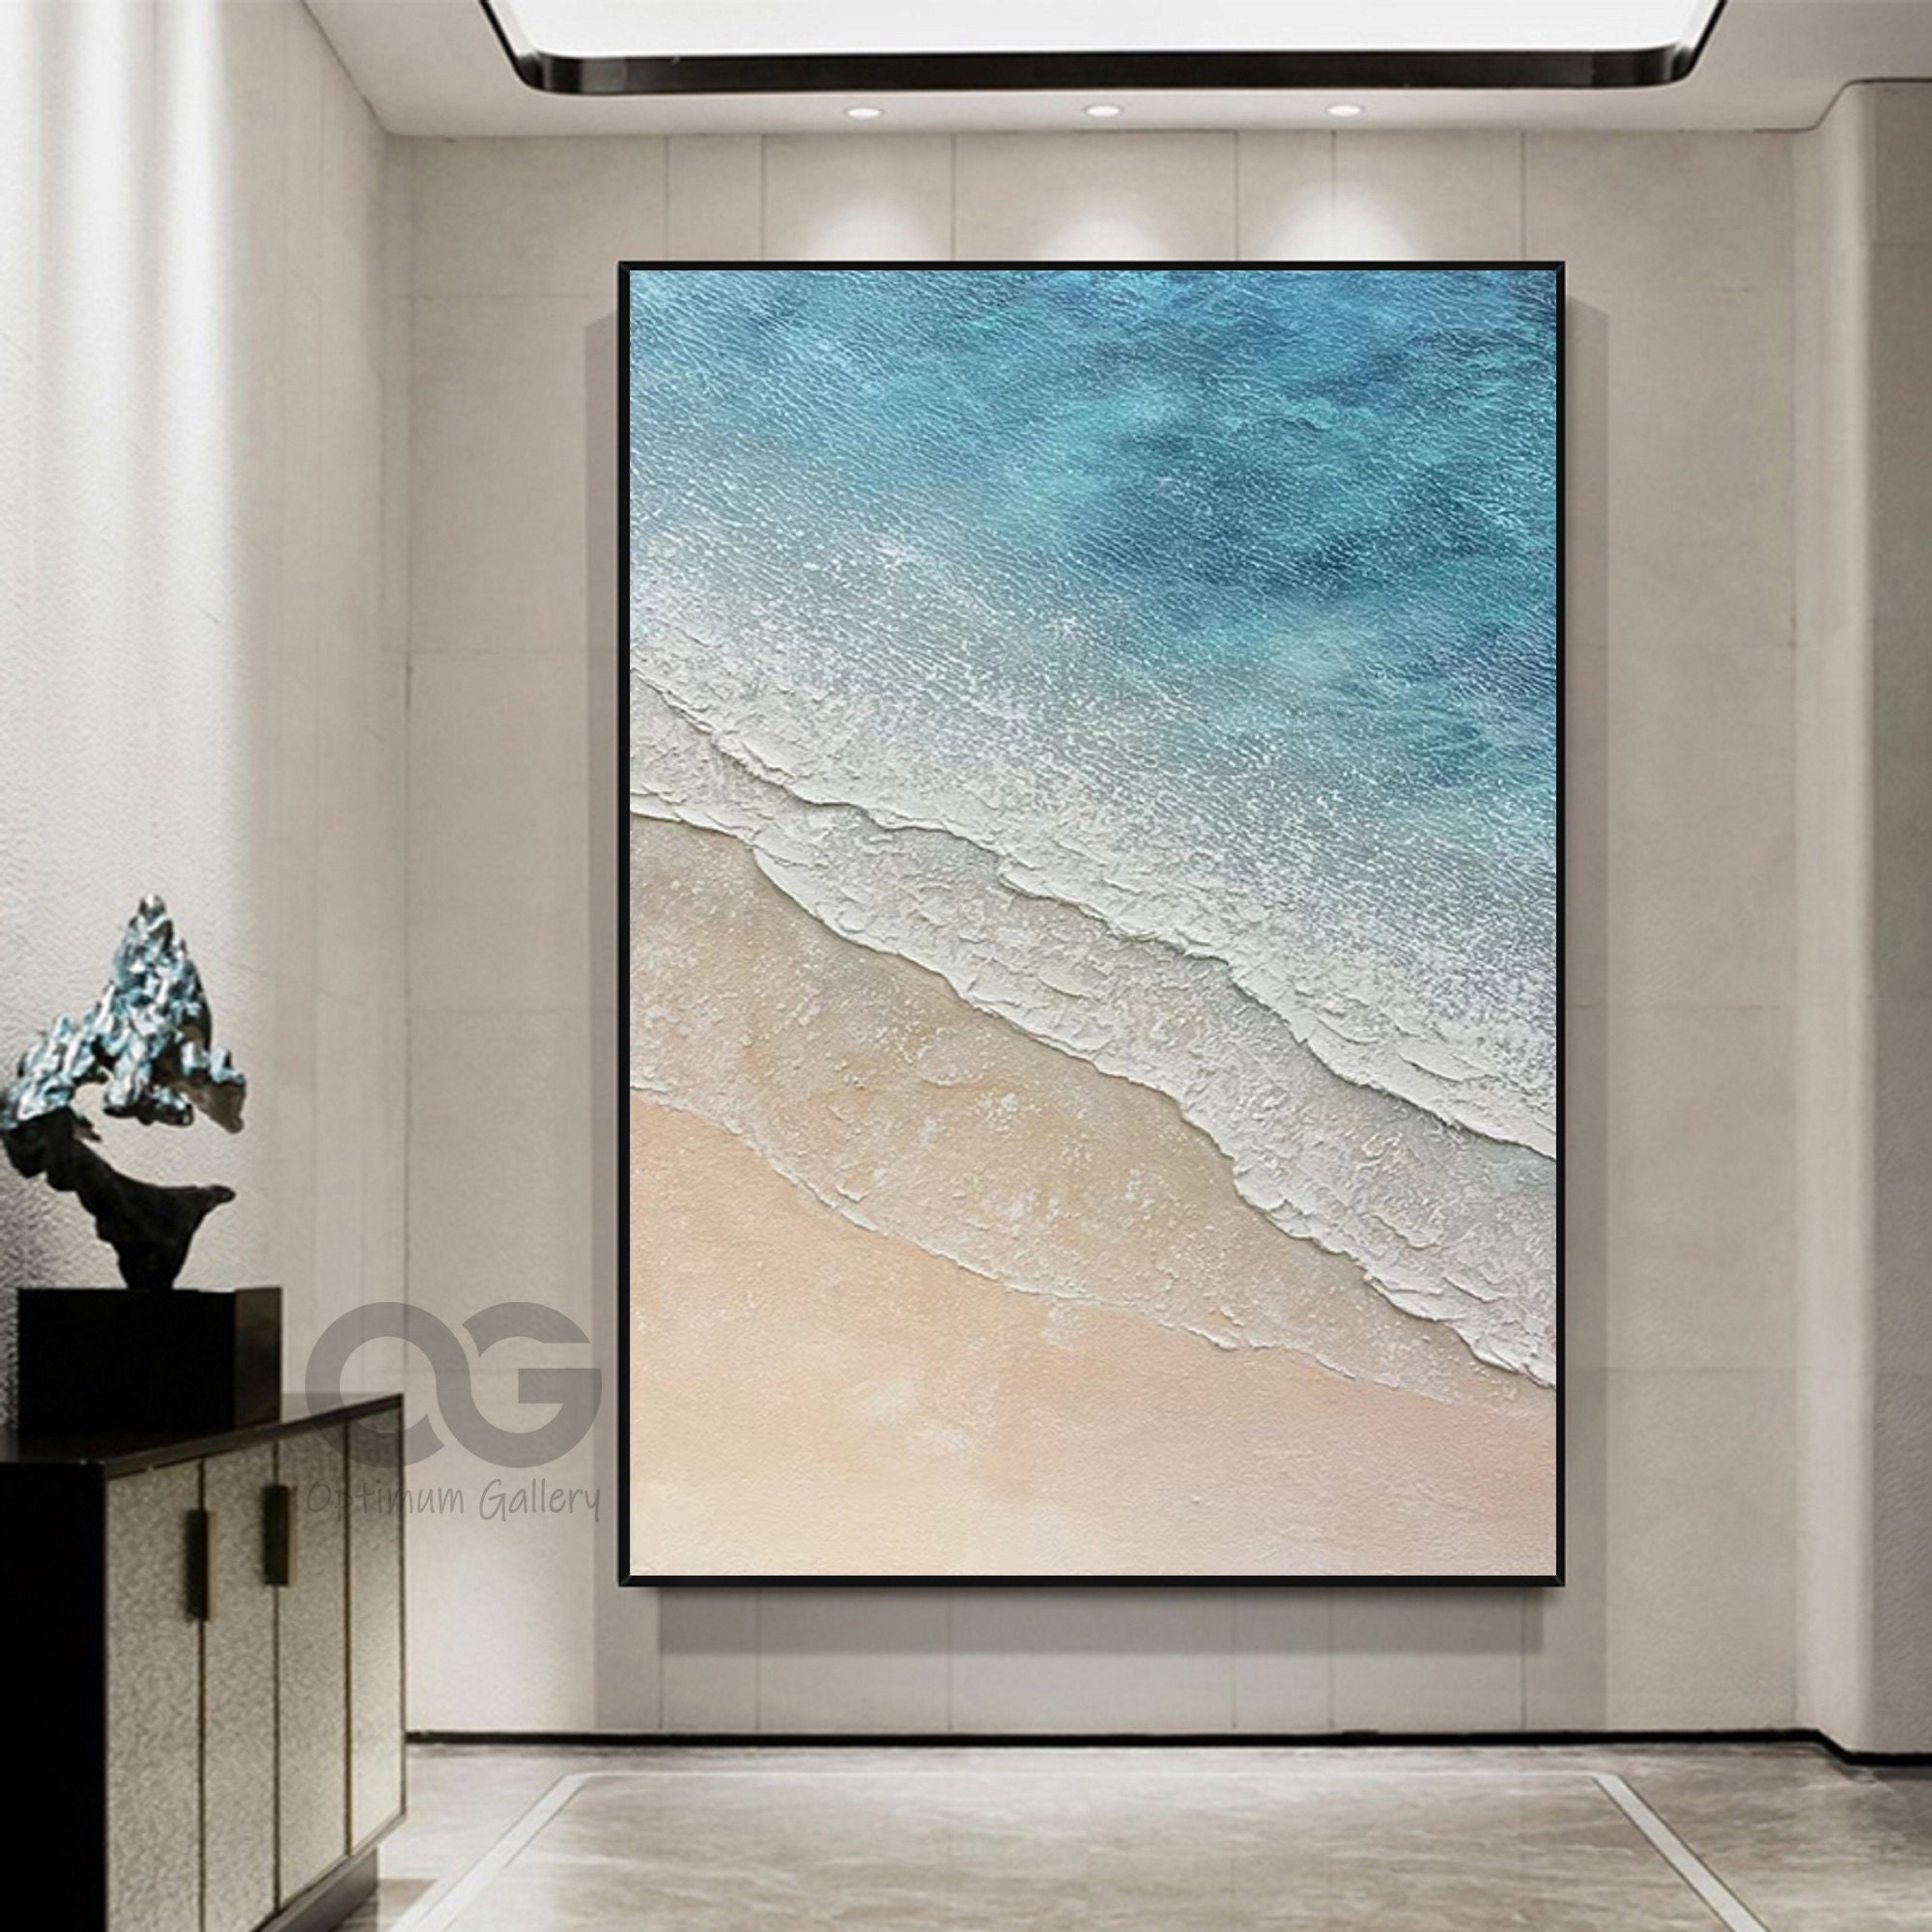 Canvas Art Framed Coastal Ocean Canvas Art Etsy Wave Large Abstract Wall - Wall Painting Textured Blue Whie Landscape Beach Acrylic Painting Decor